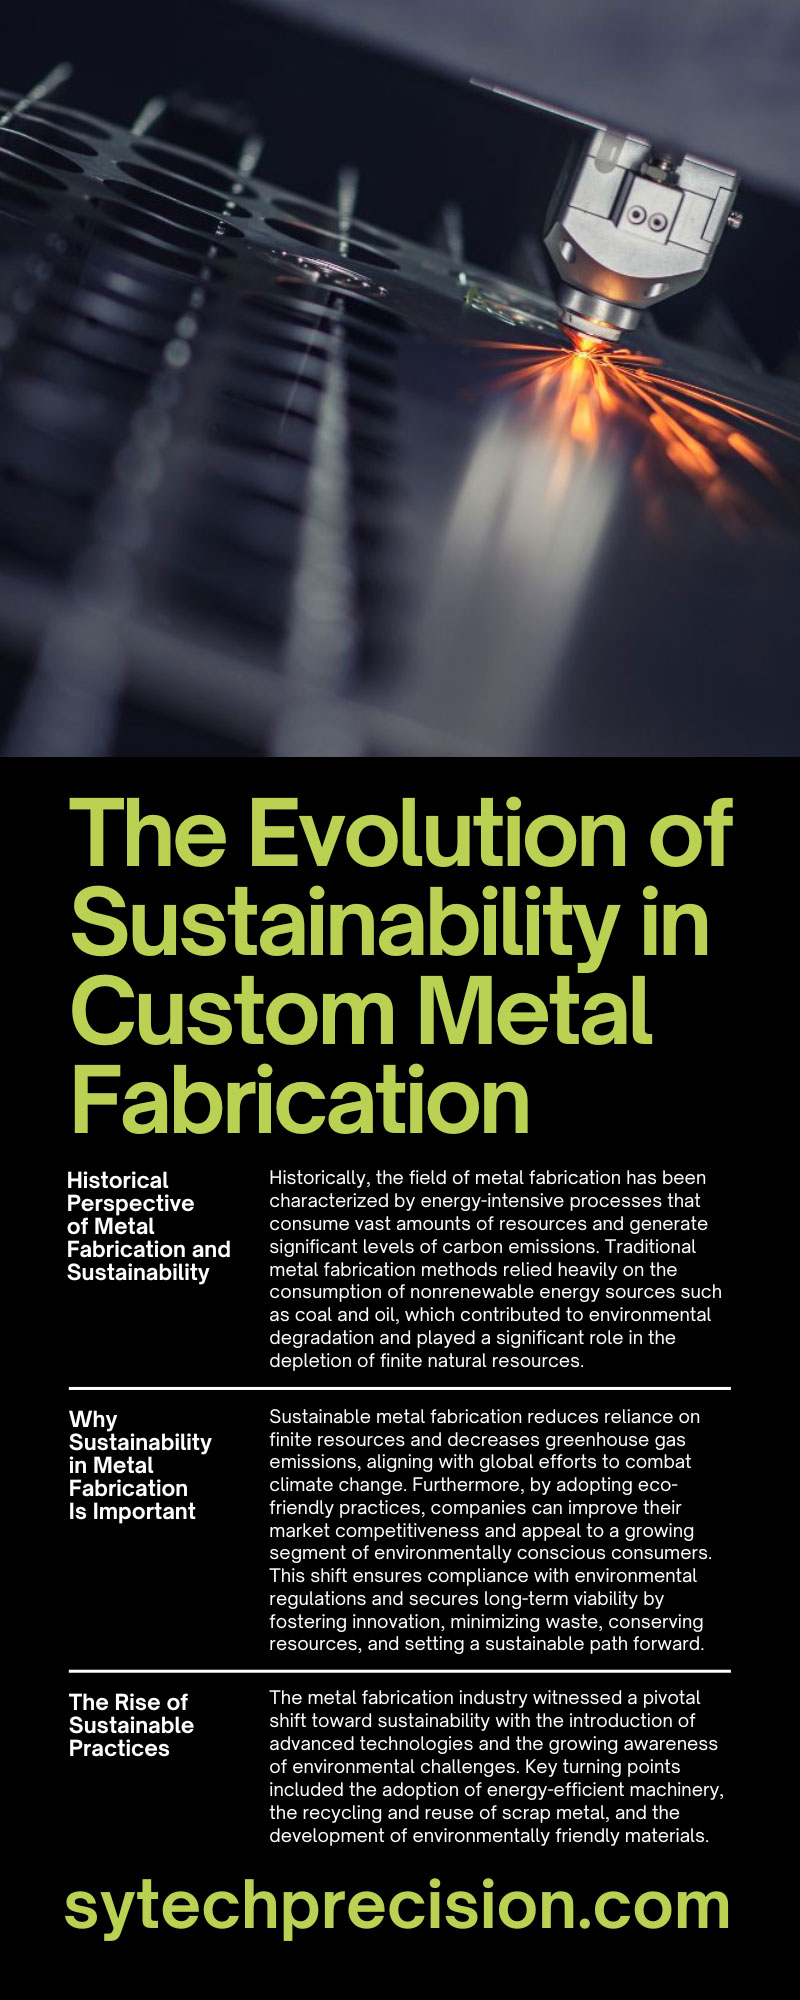 The Evolution of Sustainability in Custom Metal Fabrication